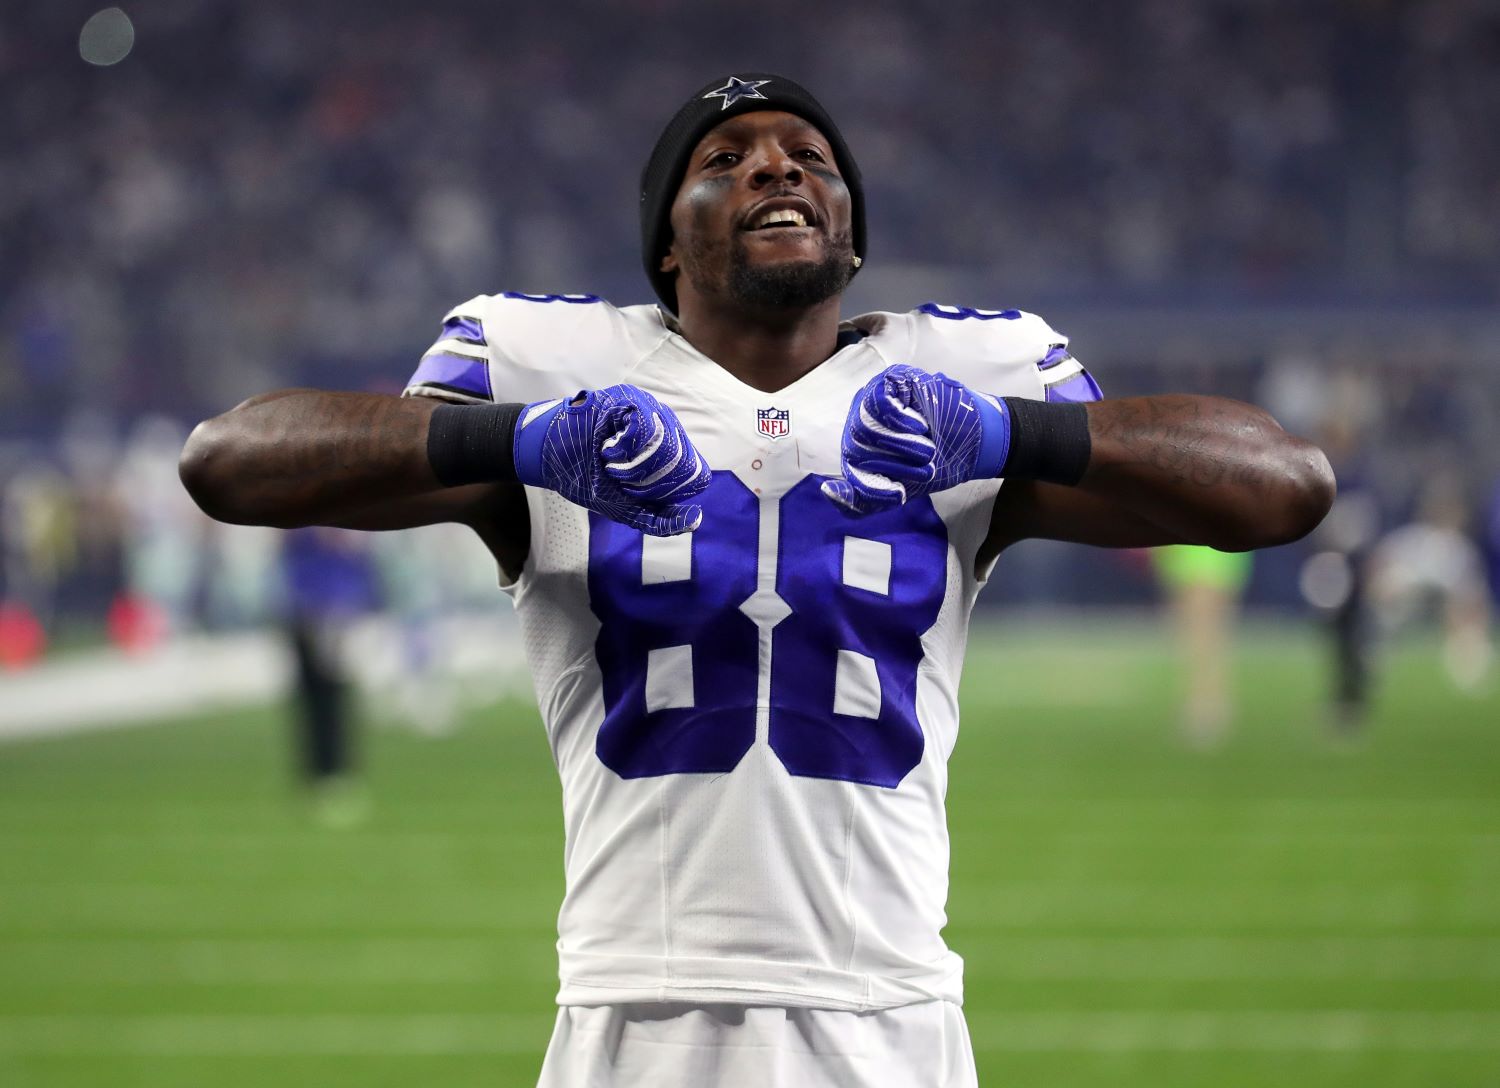 By joining forces with Lamar Jackson and the Ravens, former Cowboys star Dez Bryant just made Baltimore the team to beat in the AFC.